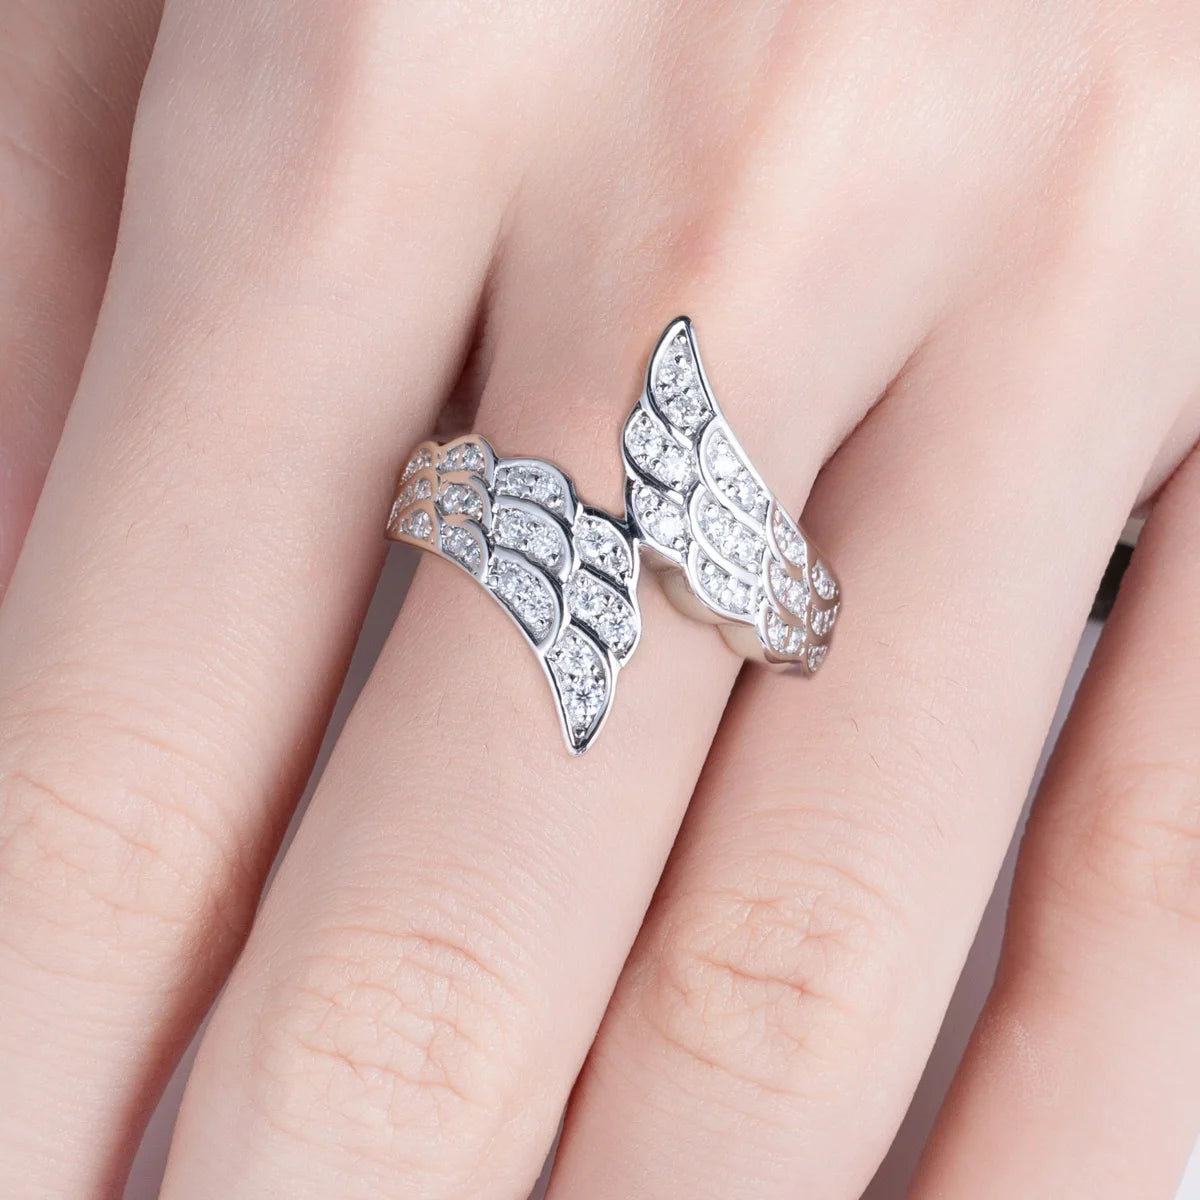 Angelic Wings Ring Set - Angel wings unique jewelry.